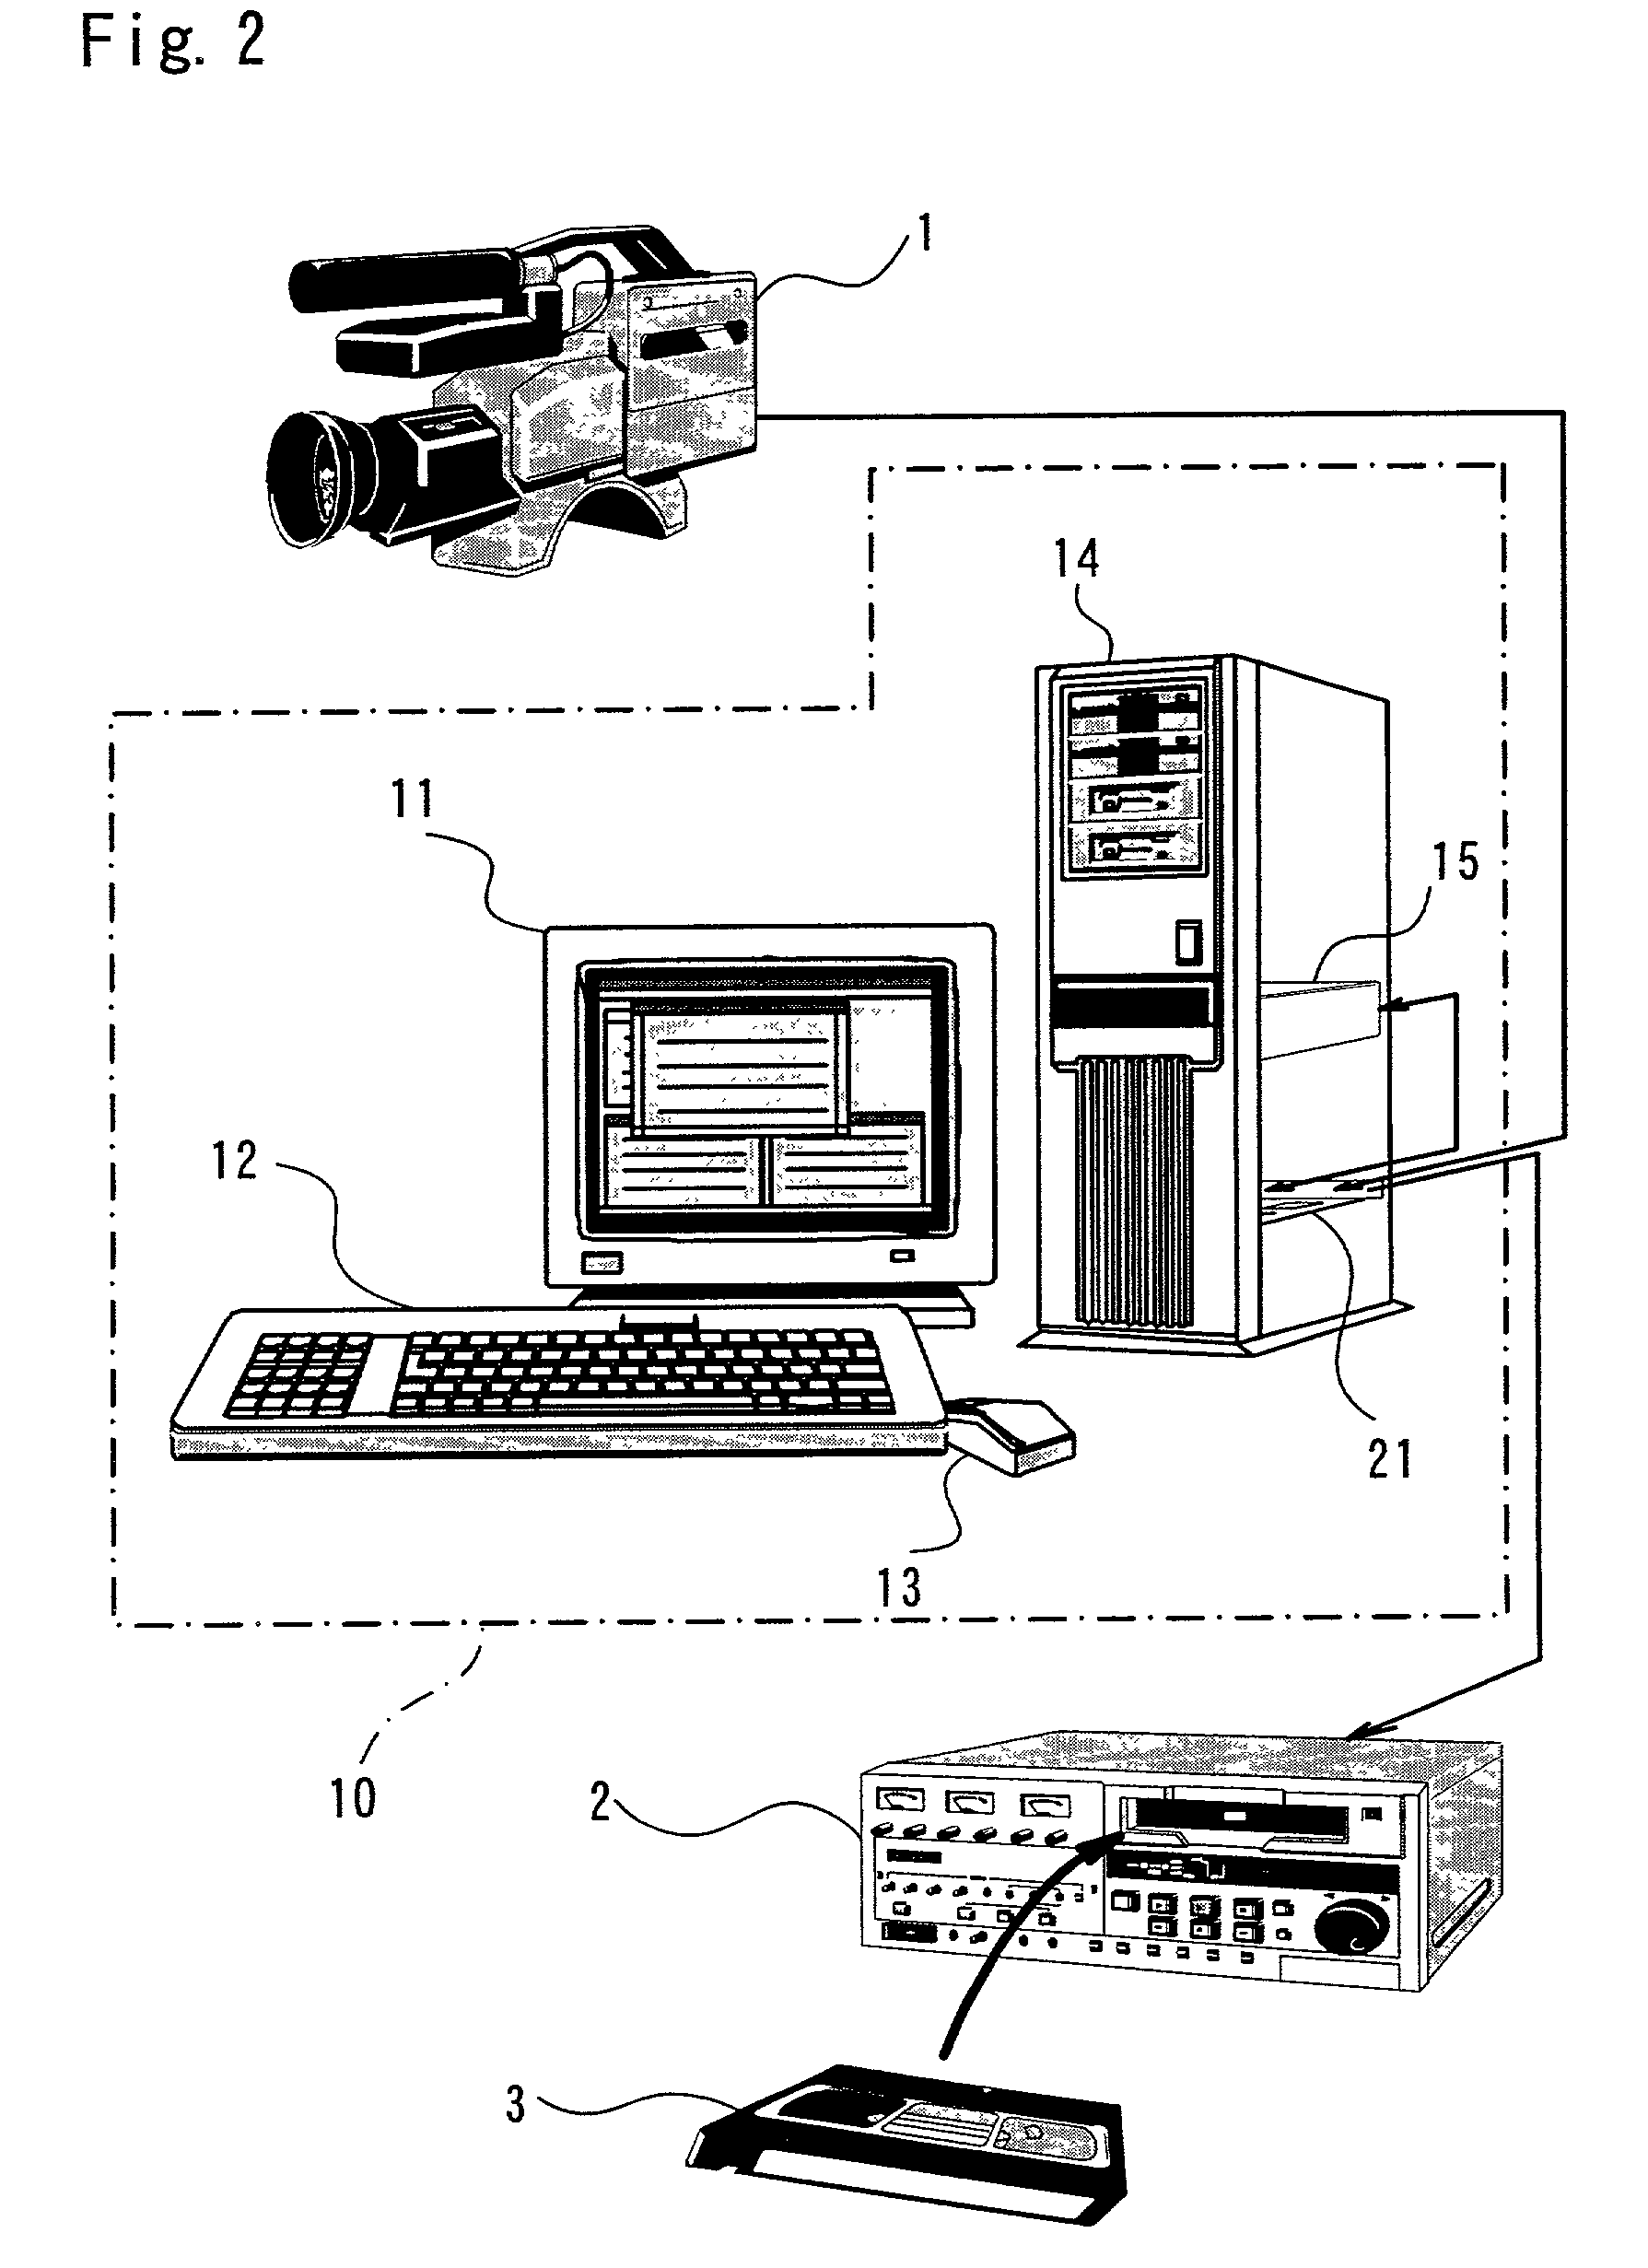 Video editing apparatus and editing method for combining a plurality of image data to generate a series of edited motion video image data